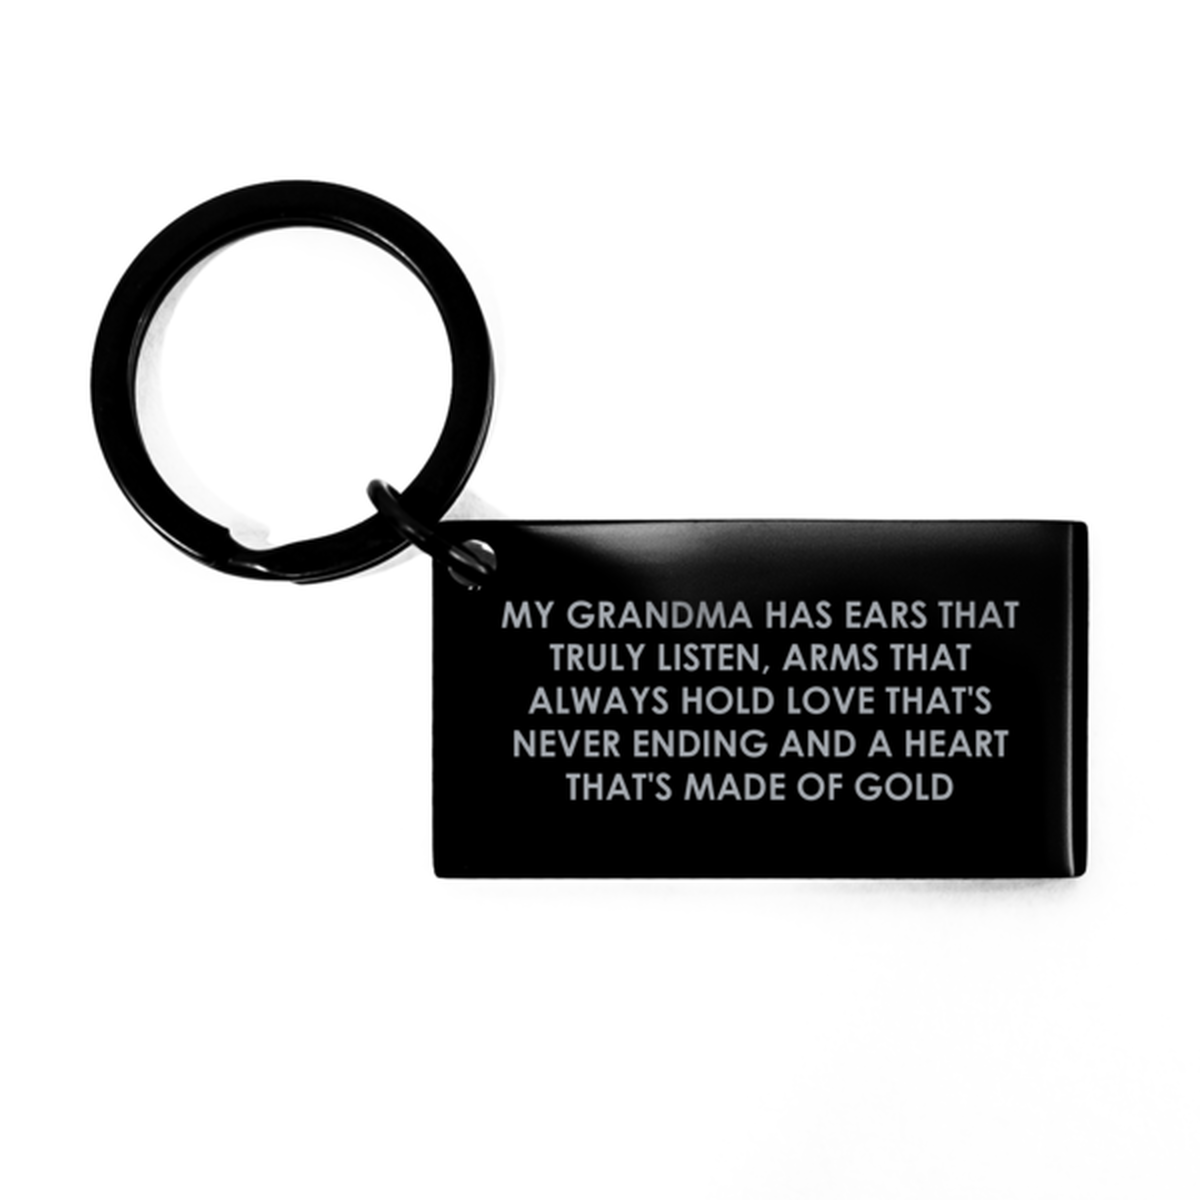 To My Grandma  Black Keychain, Heart That's Made Of Gold, Valentines Gifts For Grandma From Granddaughter, Birthday Gifts For Women